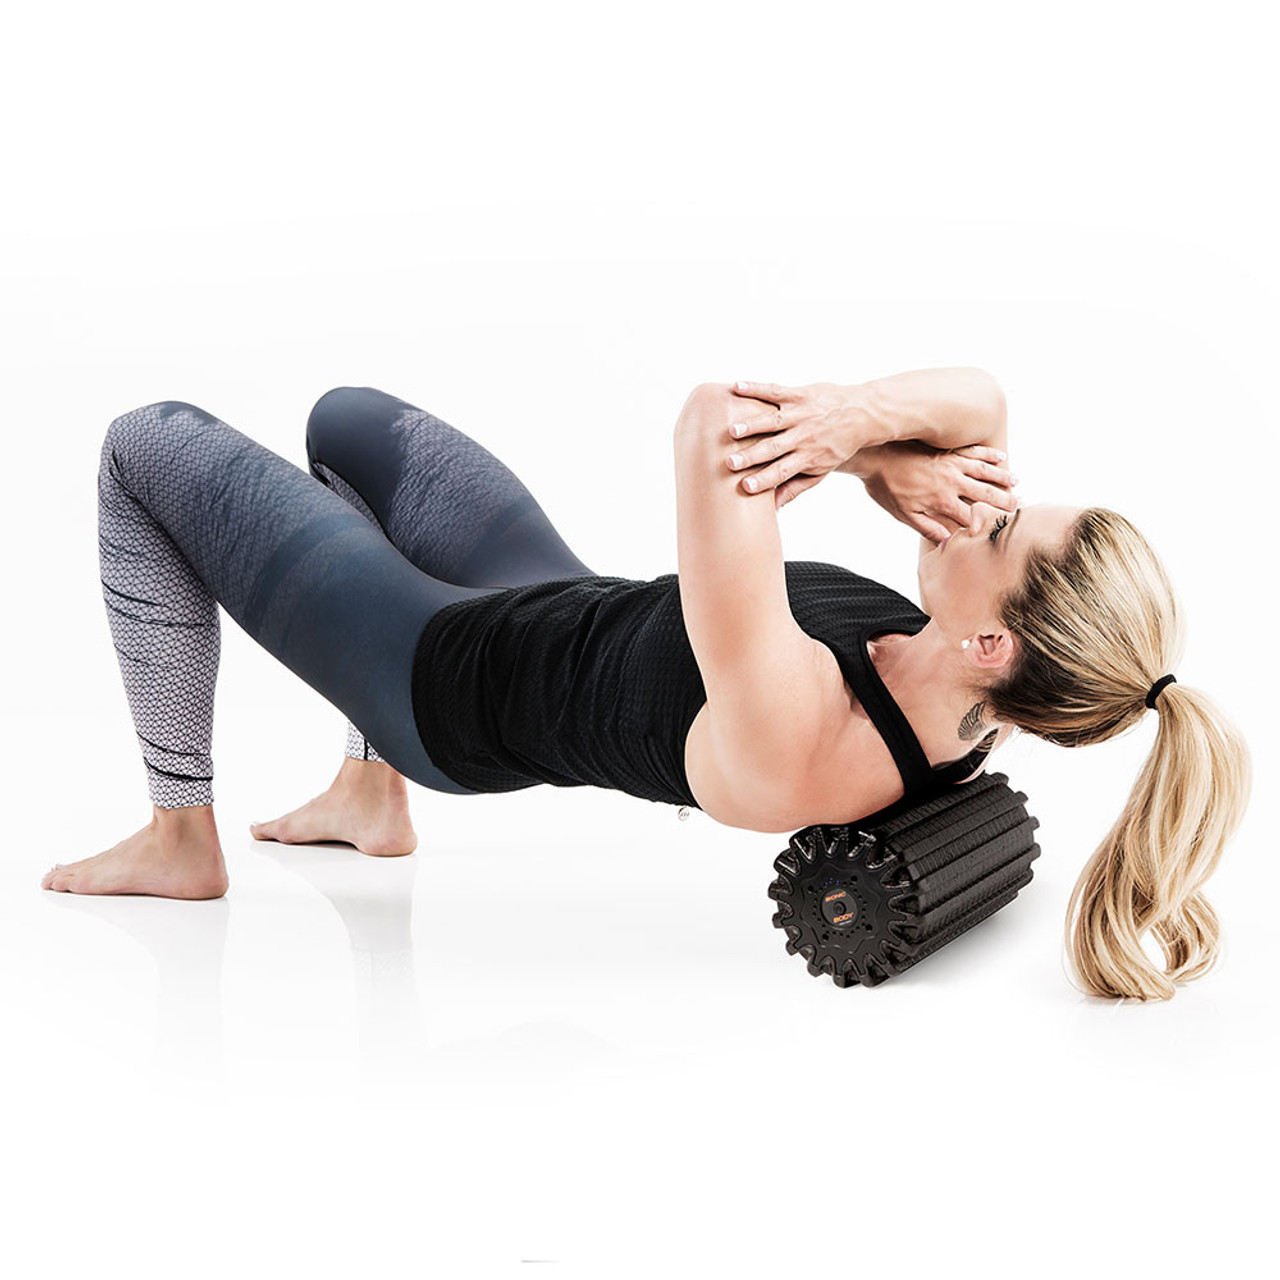 Vibrating Foam Roller - 4 Speed Rechargeable